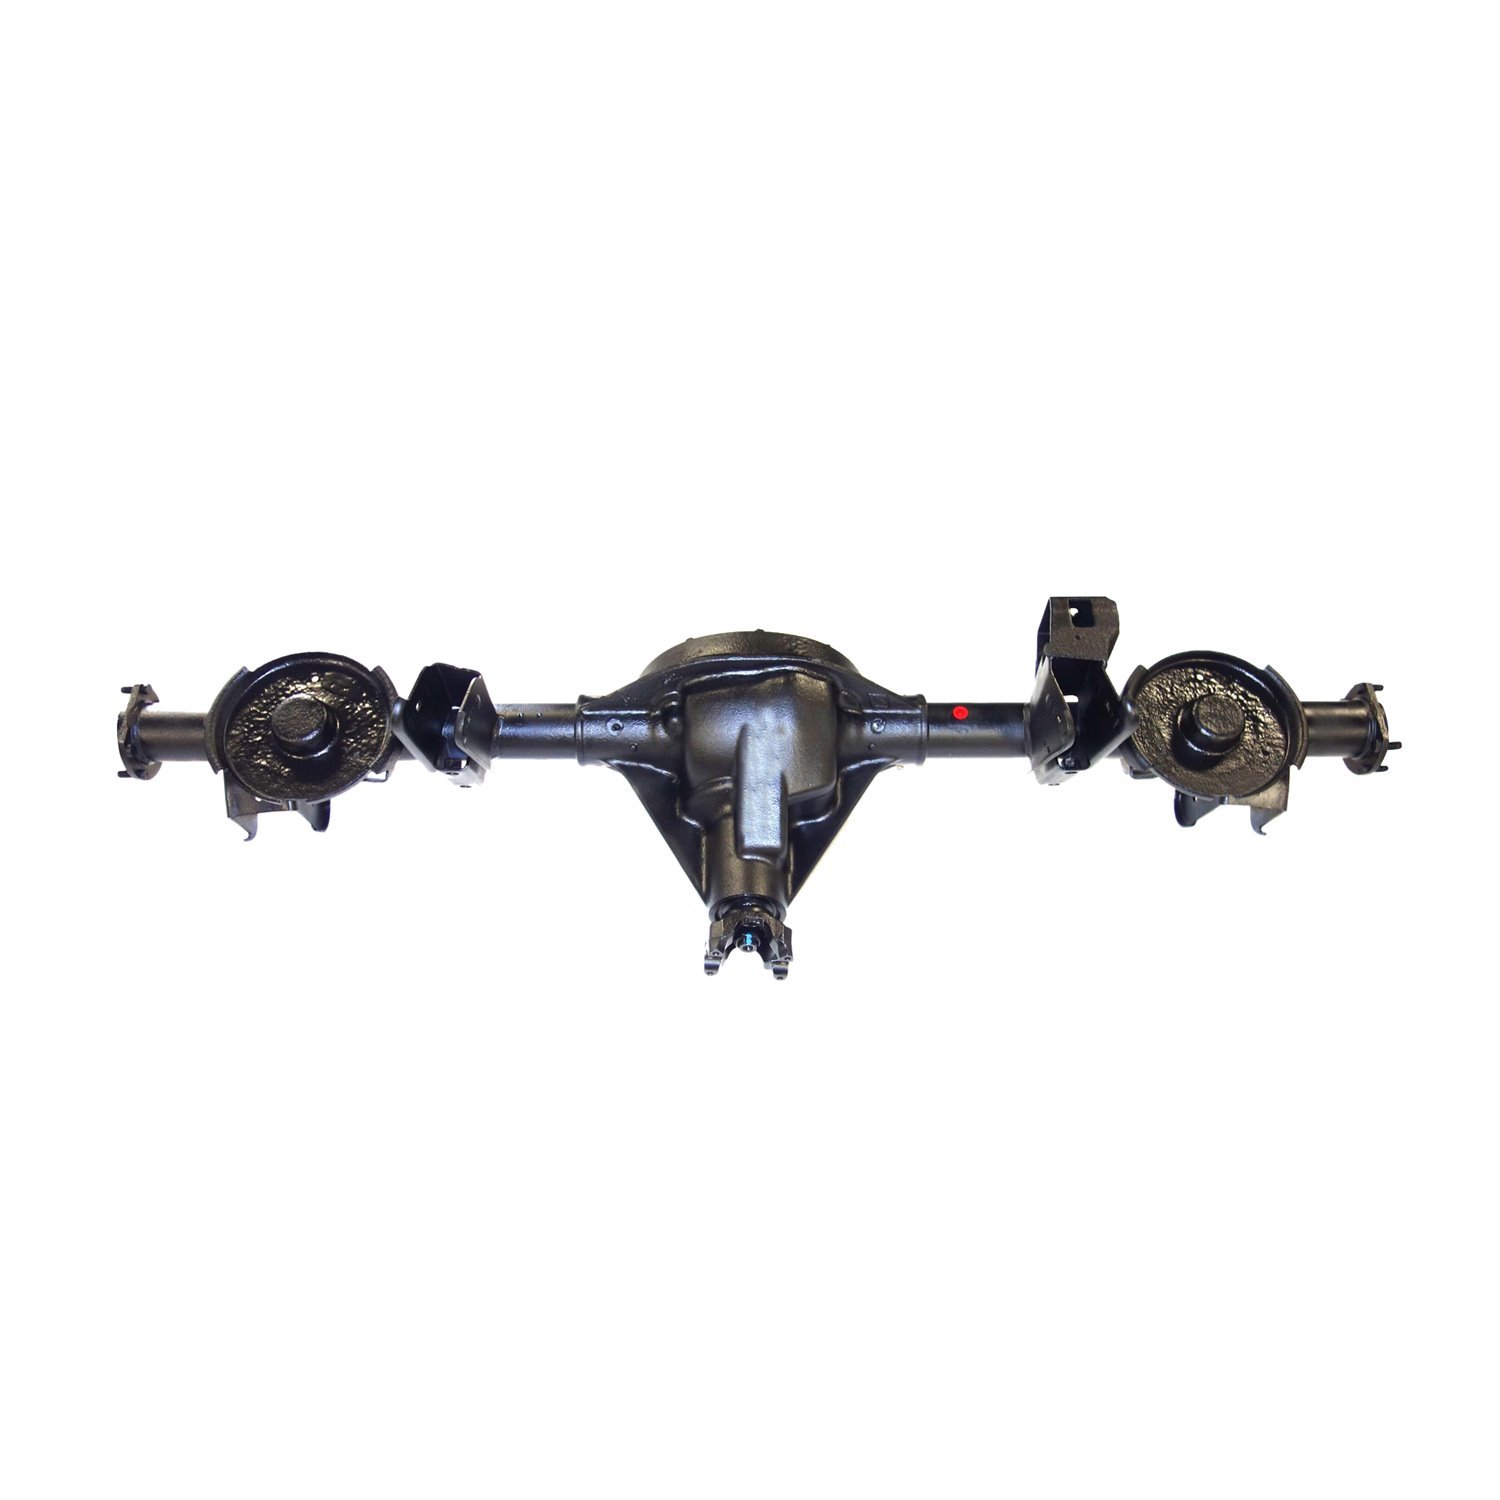 Remanufactured Complete Axle Assembly for Dana 35 2002 Liberty 4.11 , 3.7l, WABS